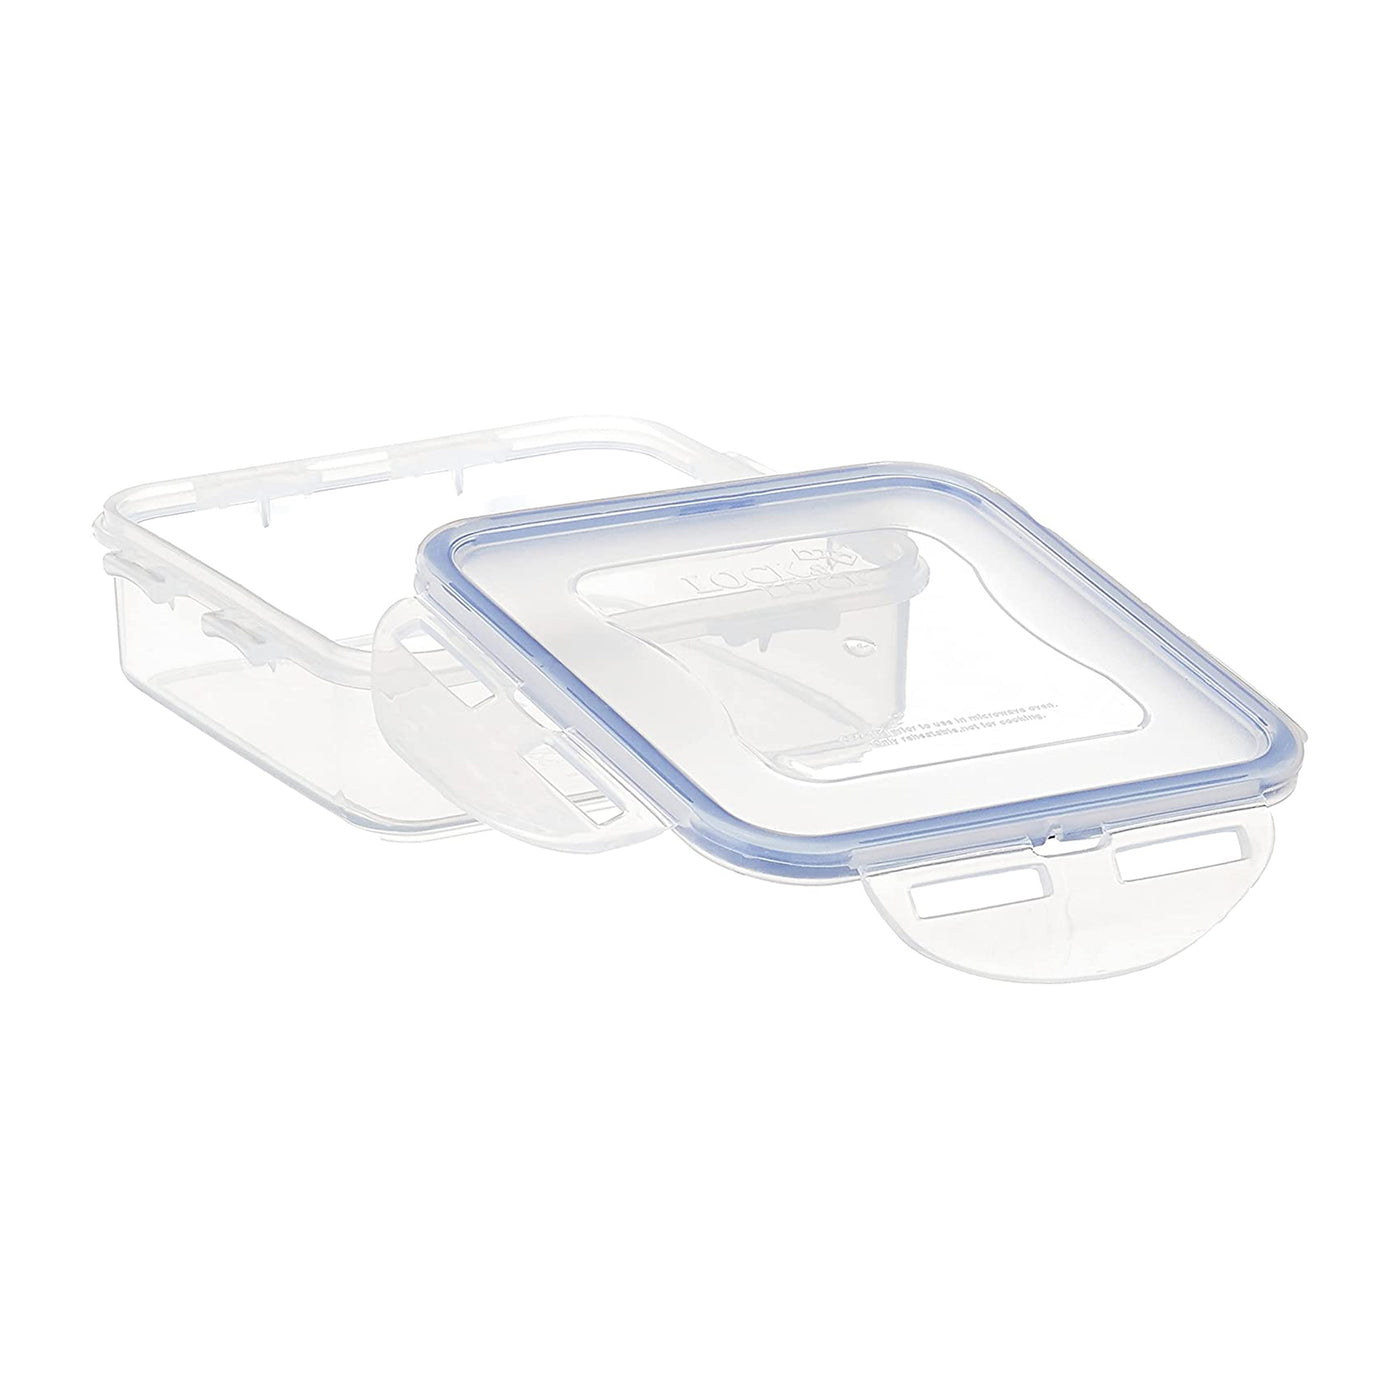 LocknLock Classic Small Flat Square Food Container | 430ML